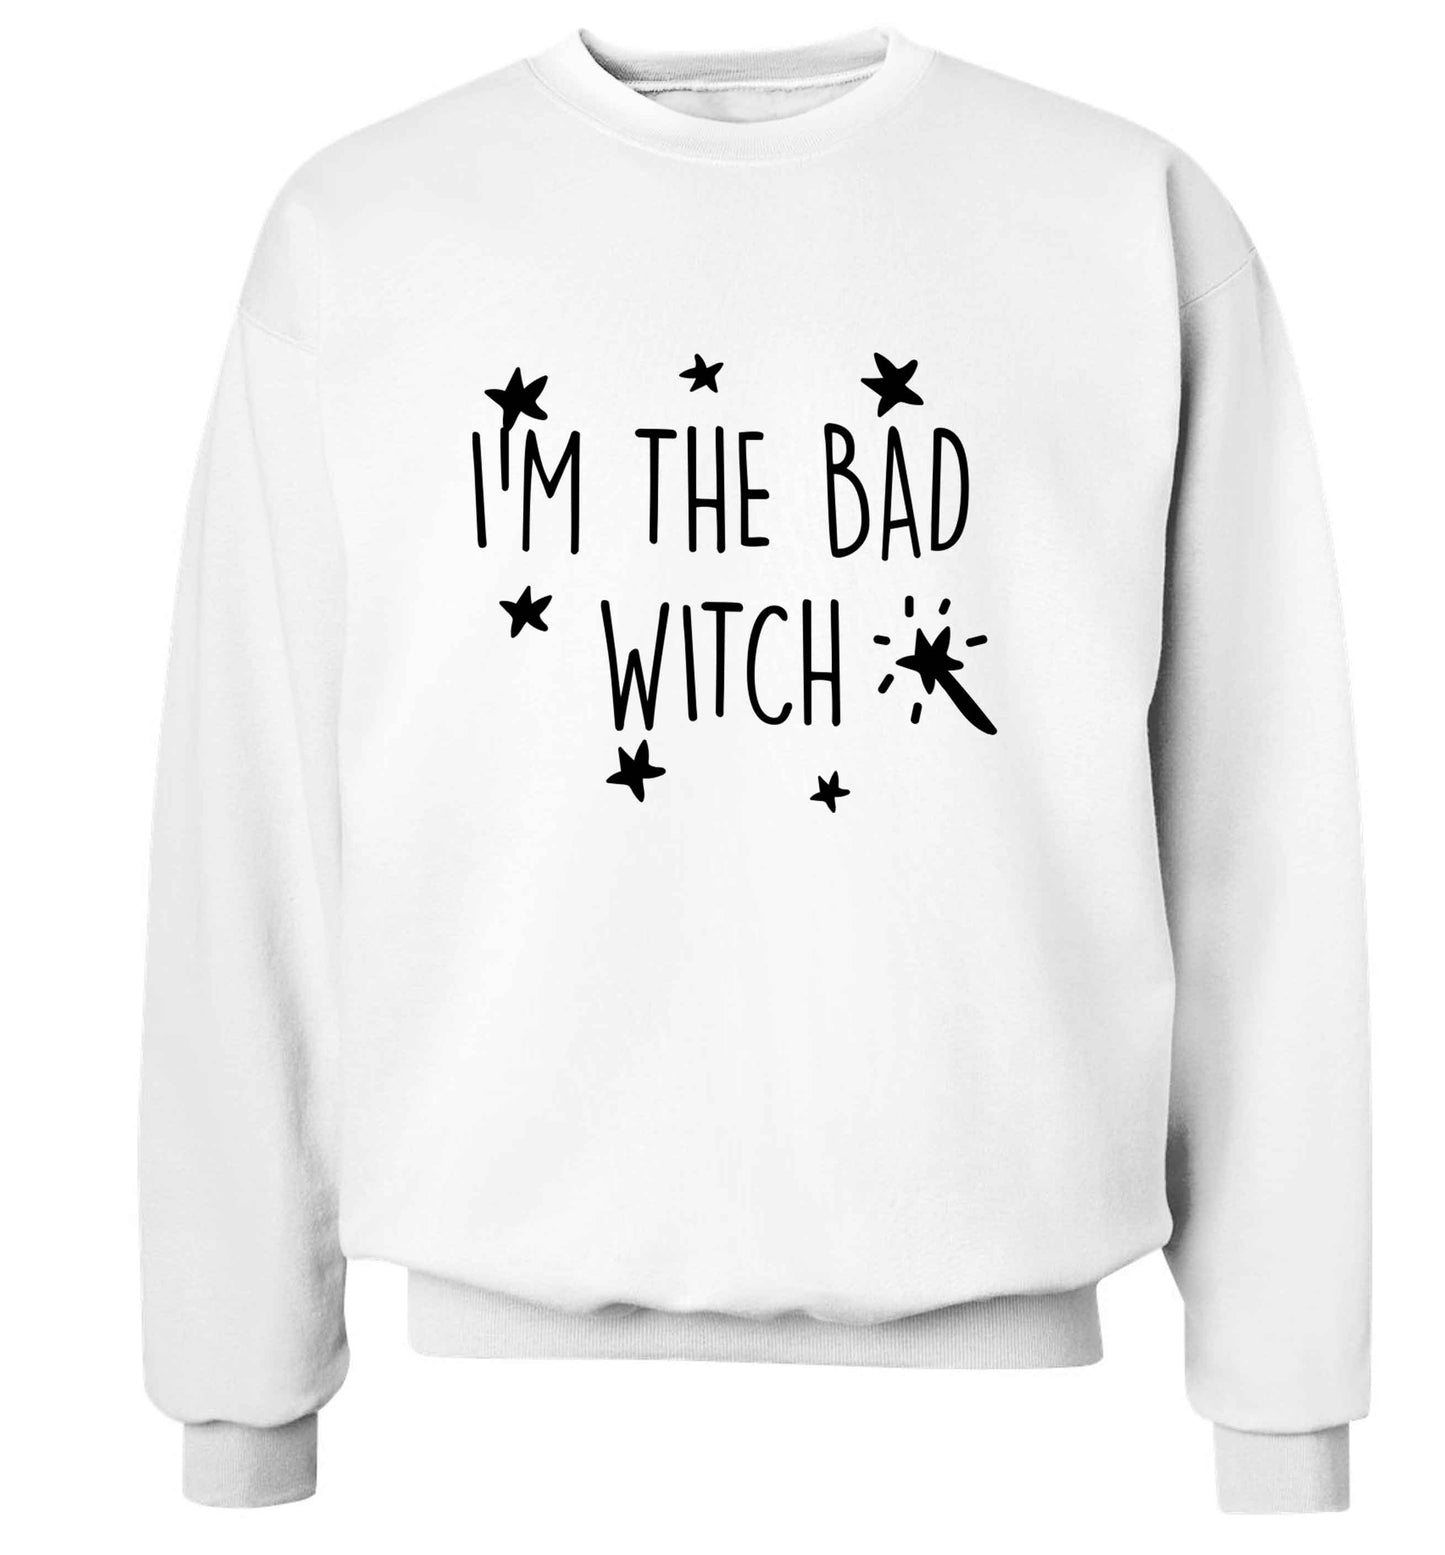 Bad witch adult's unisex white sweater 2XL